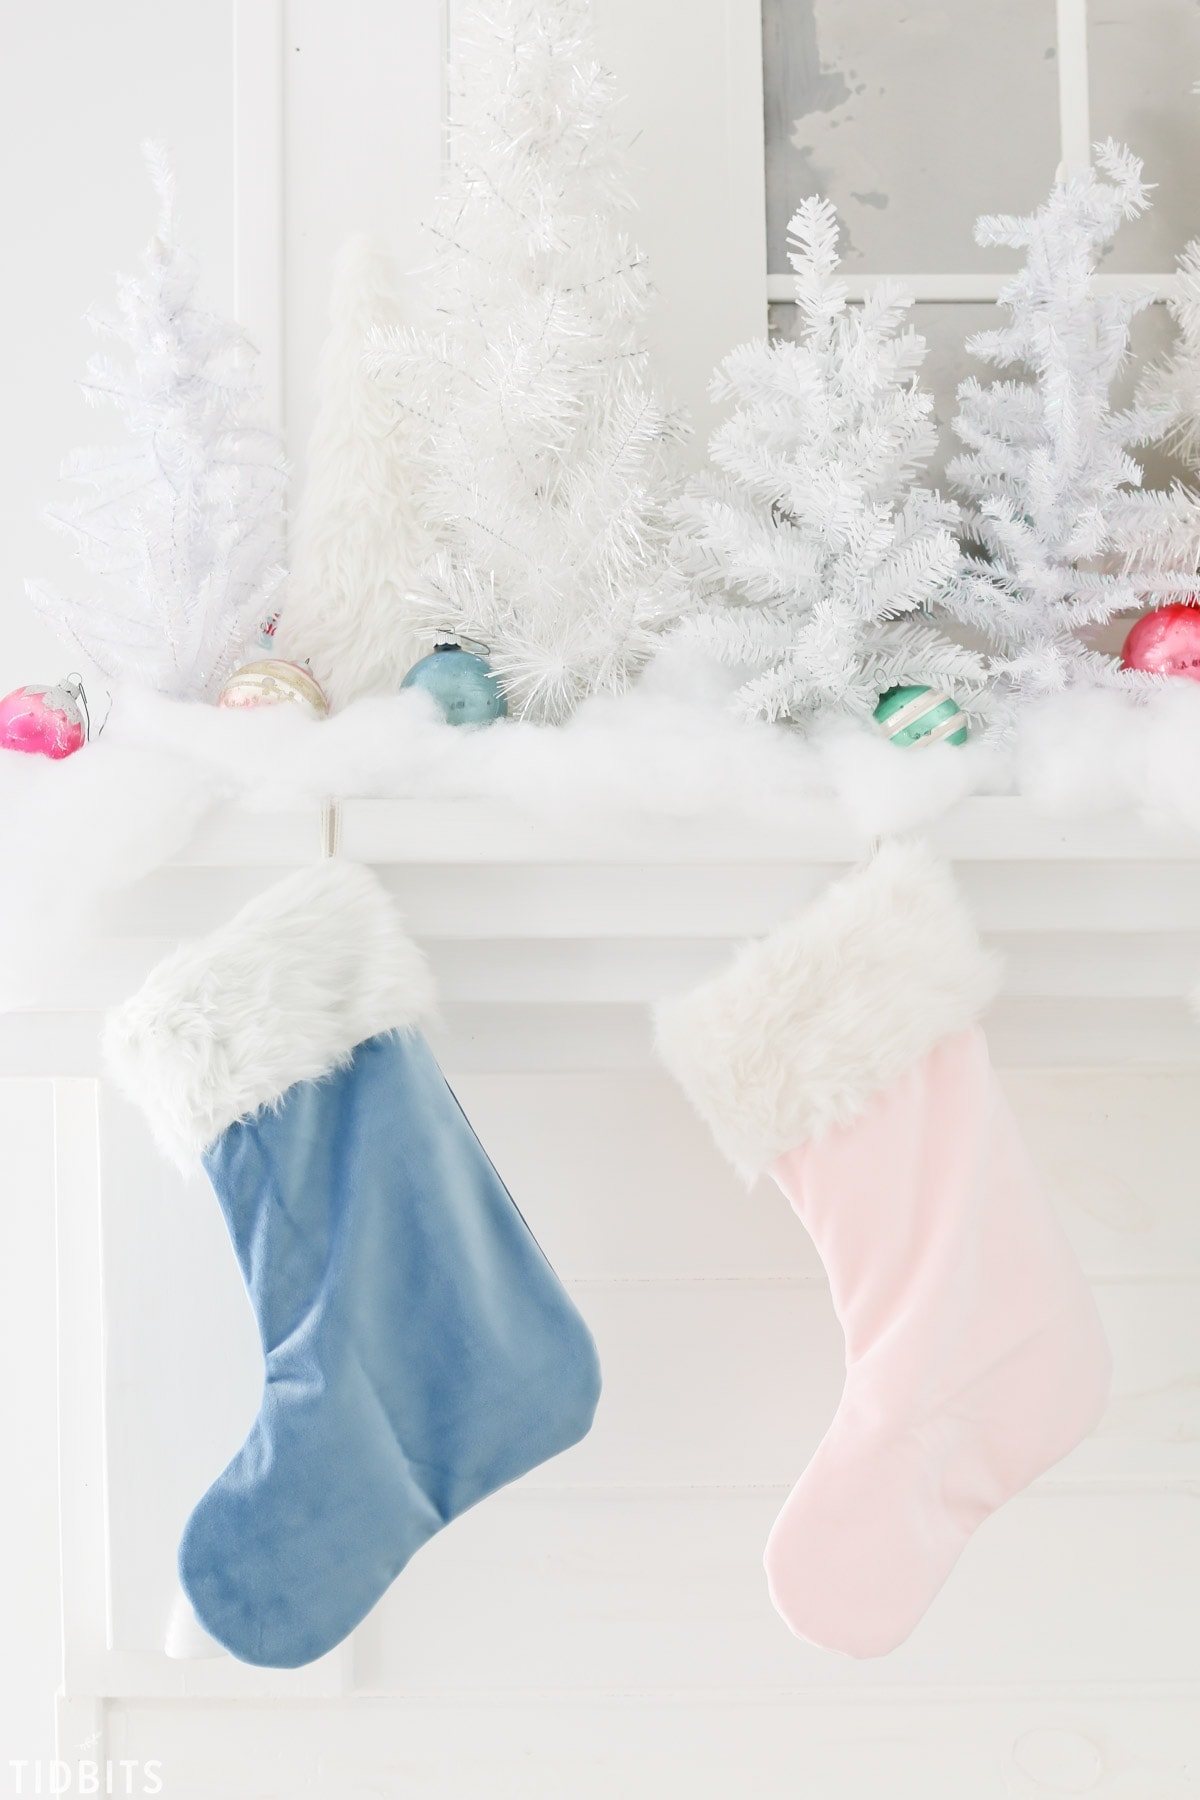 DIY Velvet Stockings made from pillow covers, by TIDBITS.